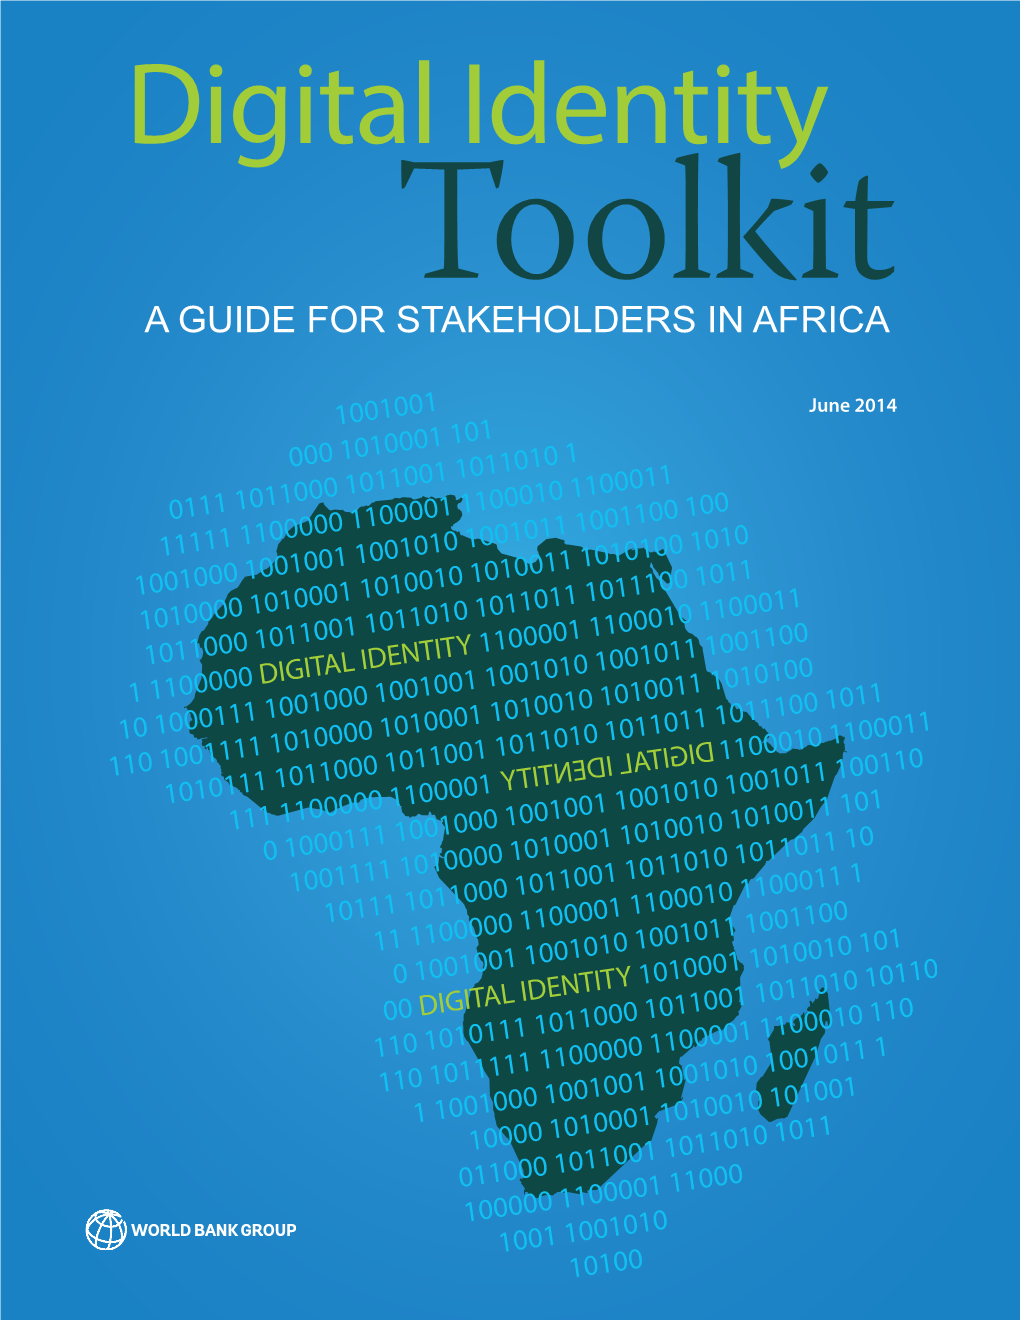 Digital Identity Toolkit: a GUIDE for STAKEHOLDERS in AFRICA Indicates That a Separate, Detailed Study on Cost-Benefit Deal with Technology